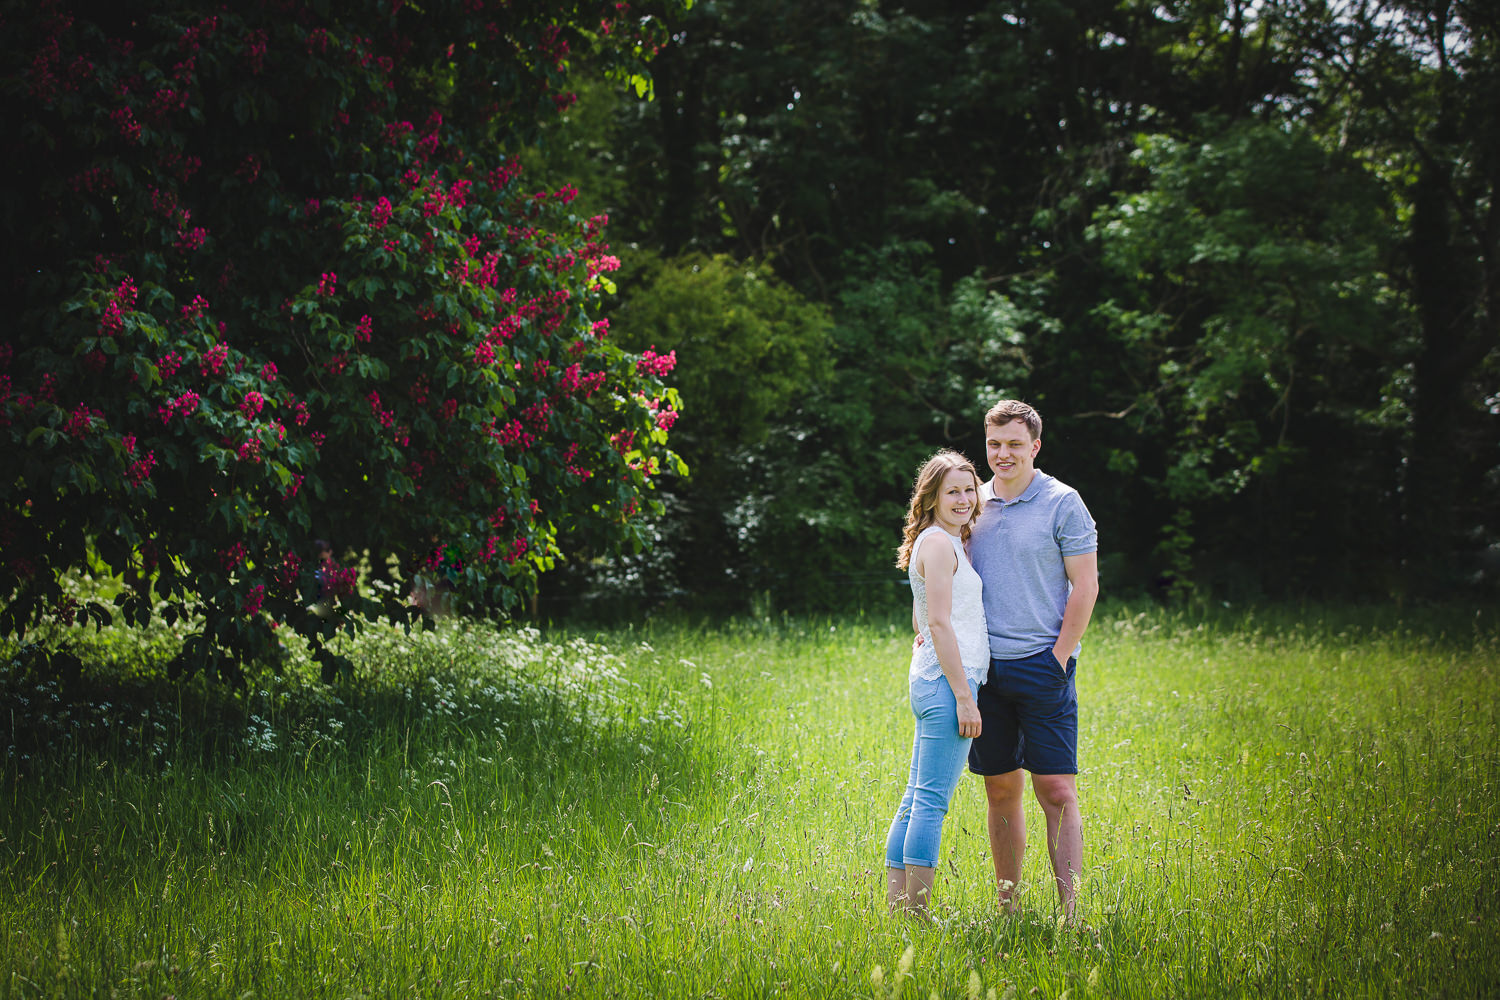 Engagement shoot photo captured by Cambridge Photographer with couple in a field in front of trees, leaves and flowers